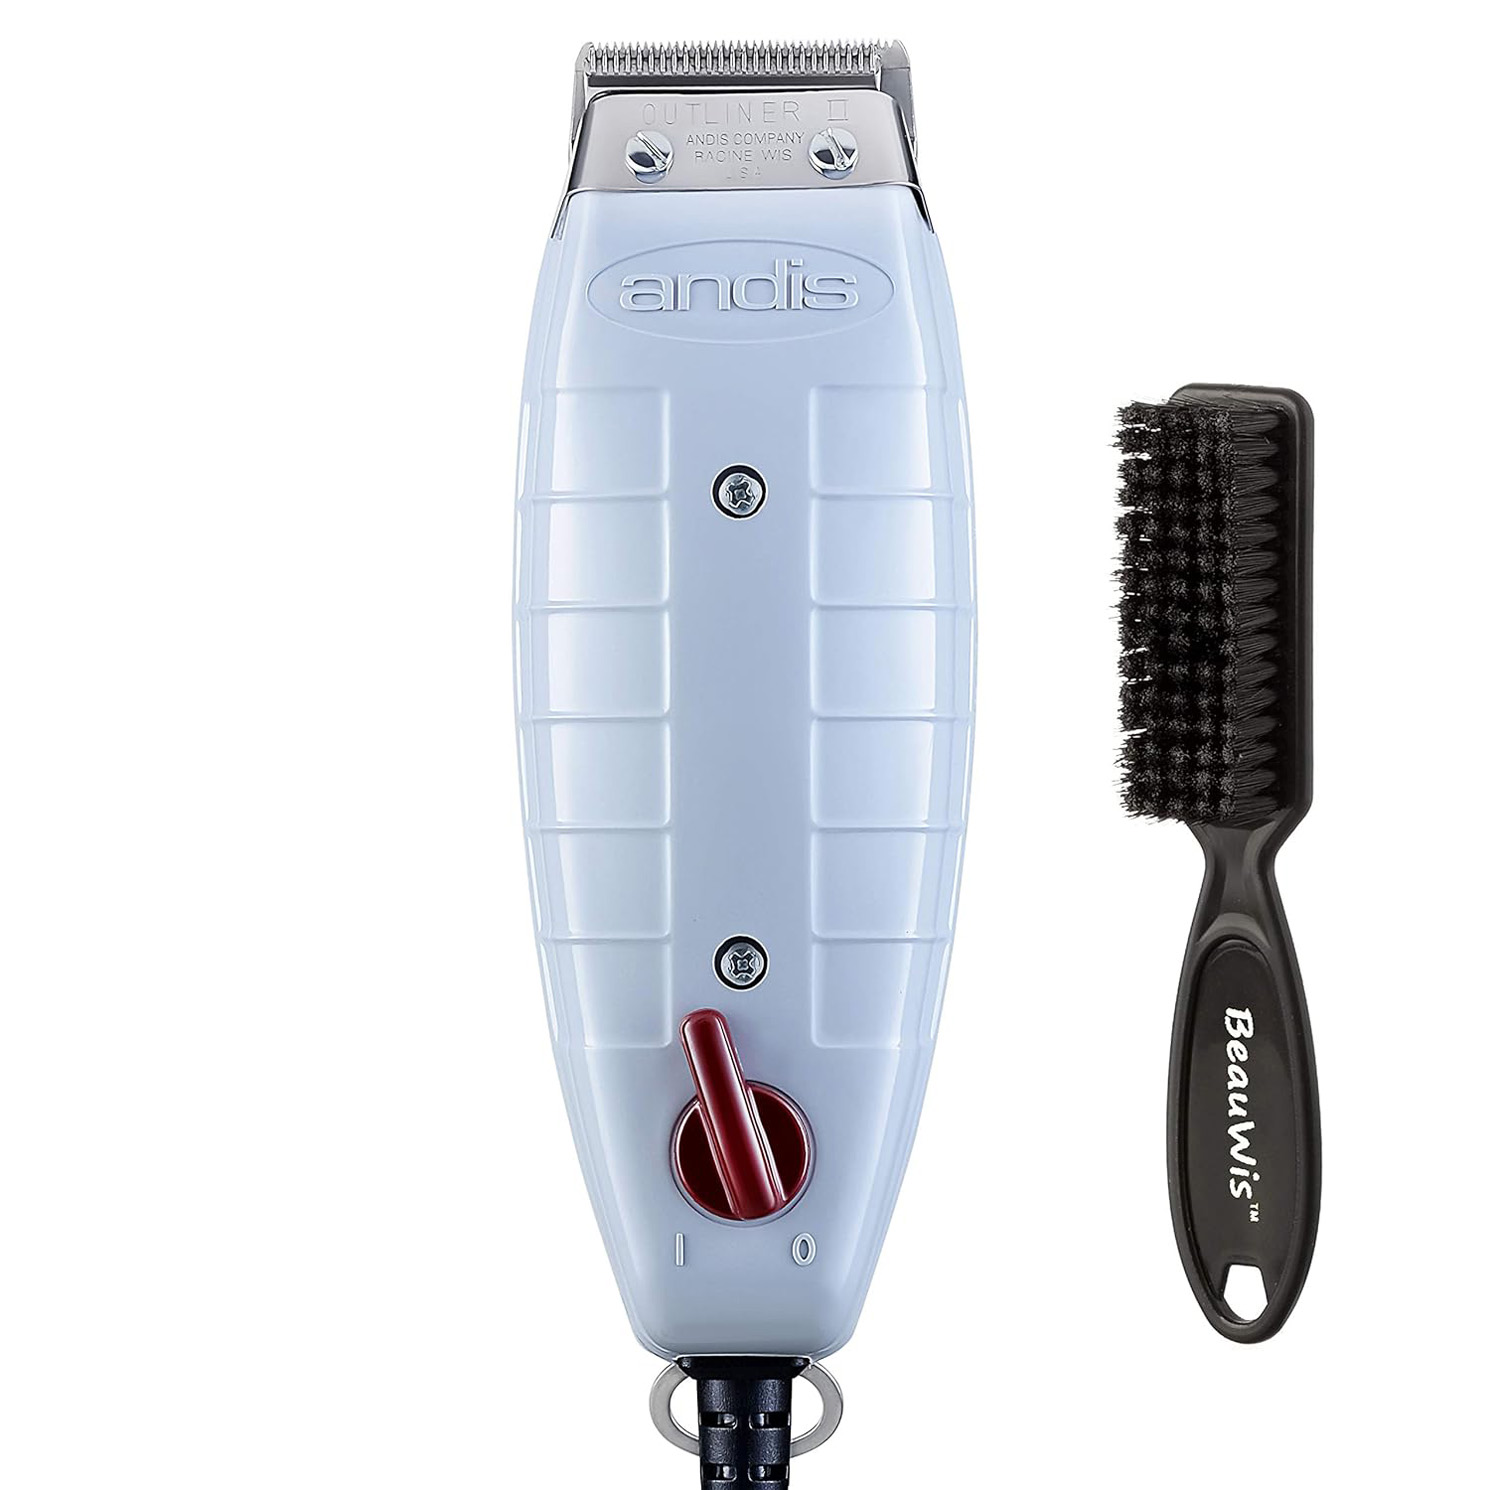 Andis Professional Outliner II Personal Trimmer, Gray (04603) with a BeauWis Blade Brush